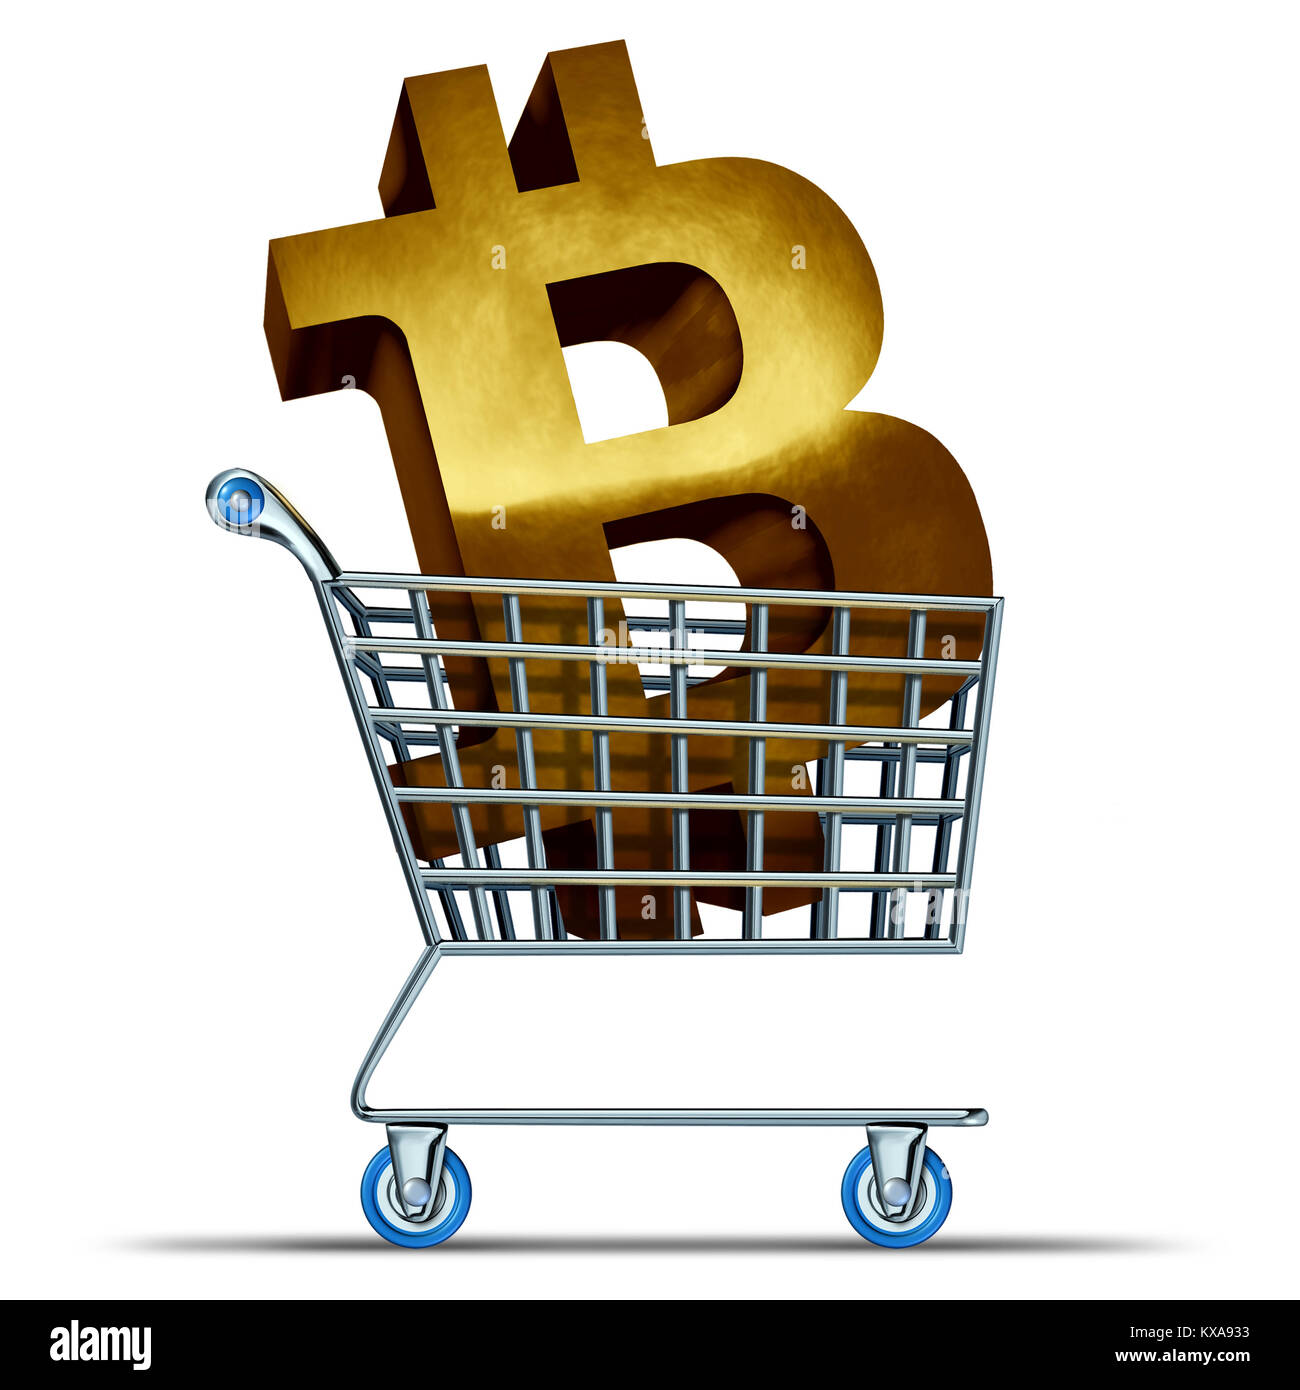 Bitcoin shopping and cryptocurrency commerce as a shop cart with a golden crypto currency symbol as an internet banking and money trading. Stock Photo